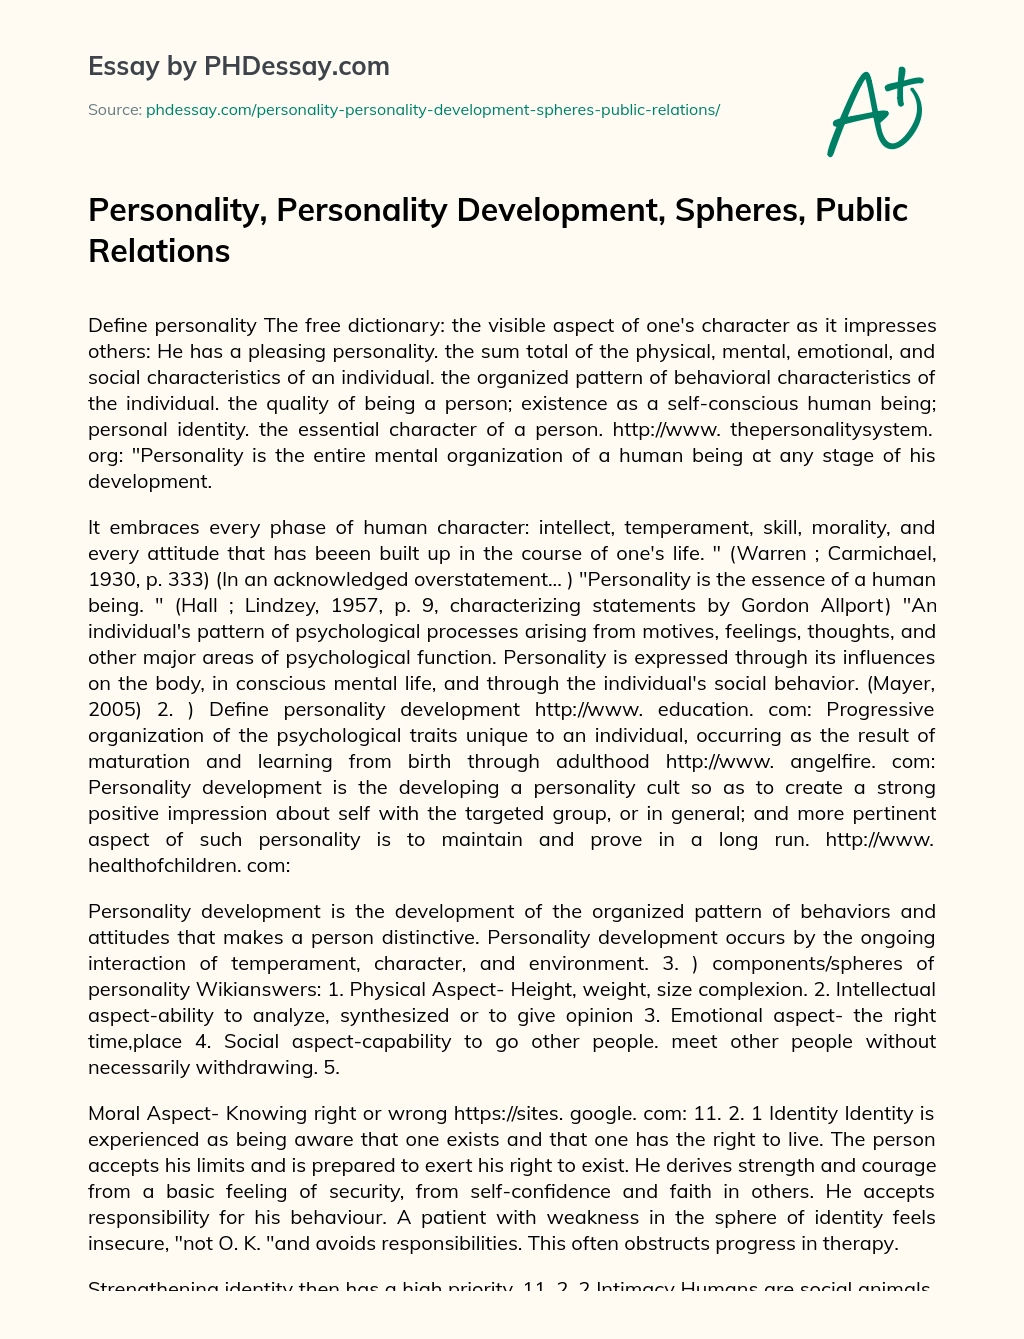 Personality, Personality Development, Spheres, Public Relations essay